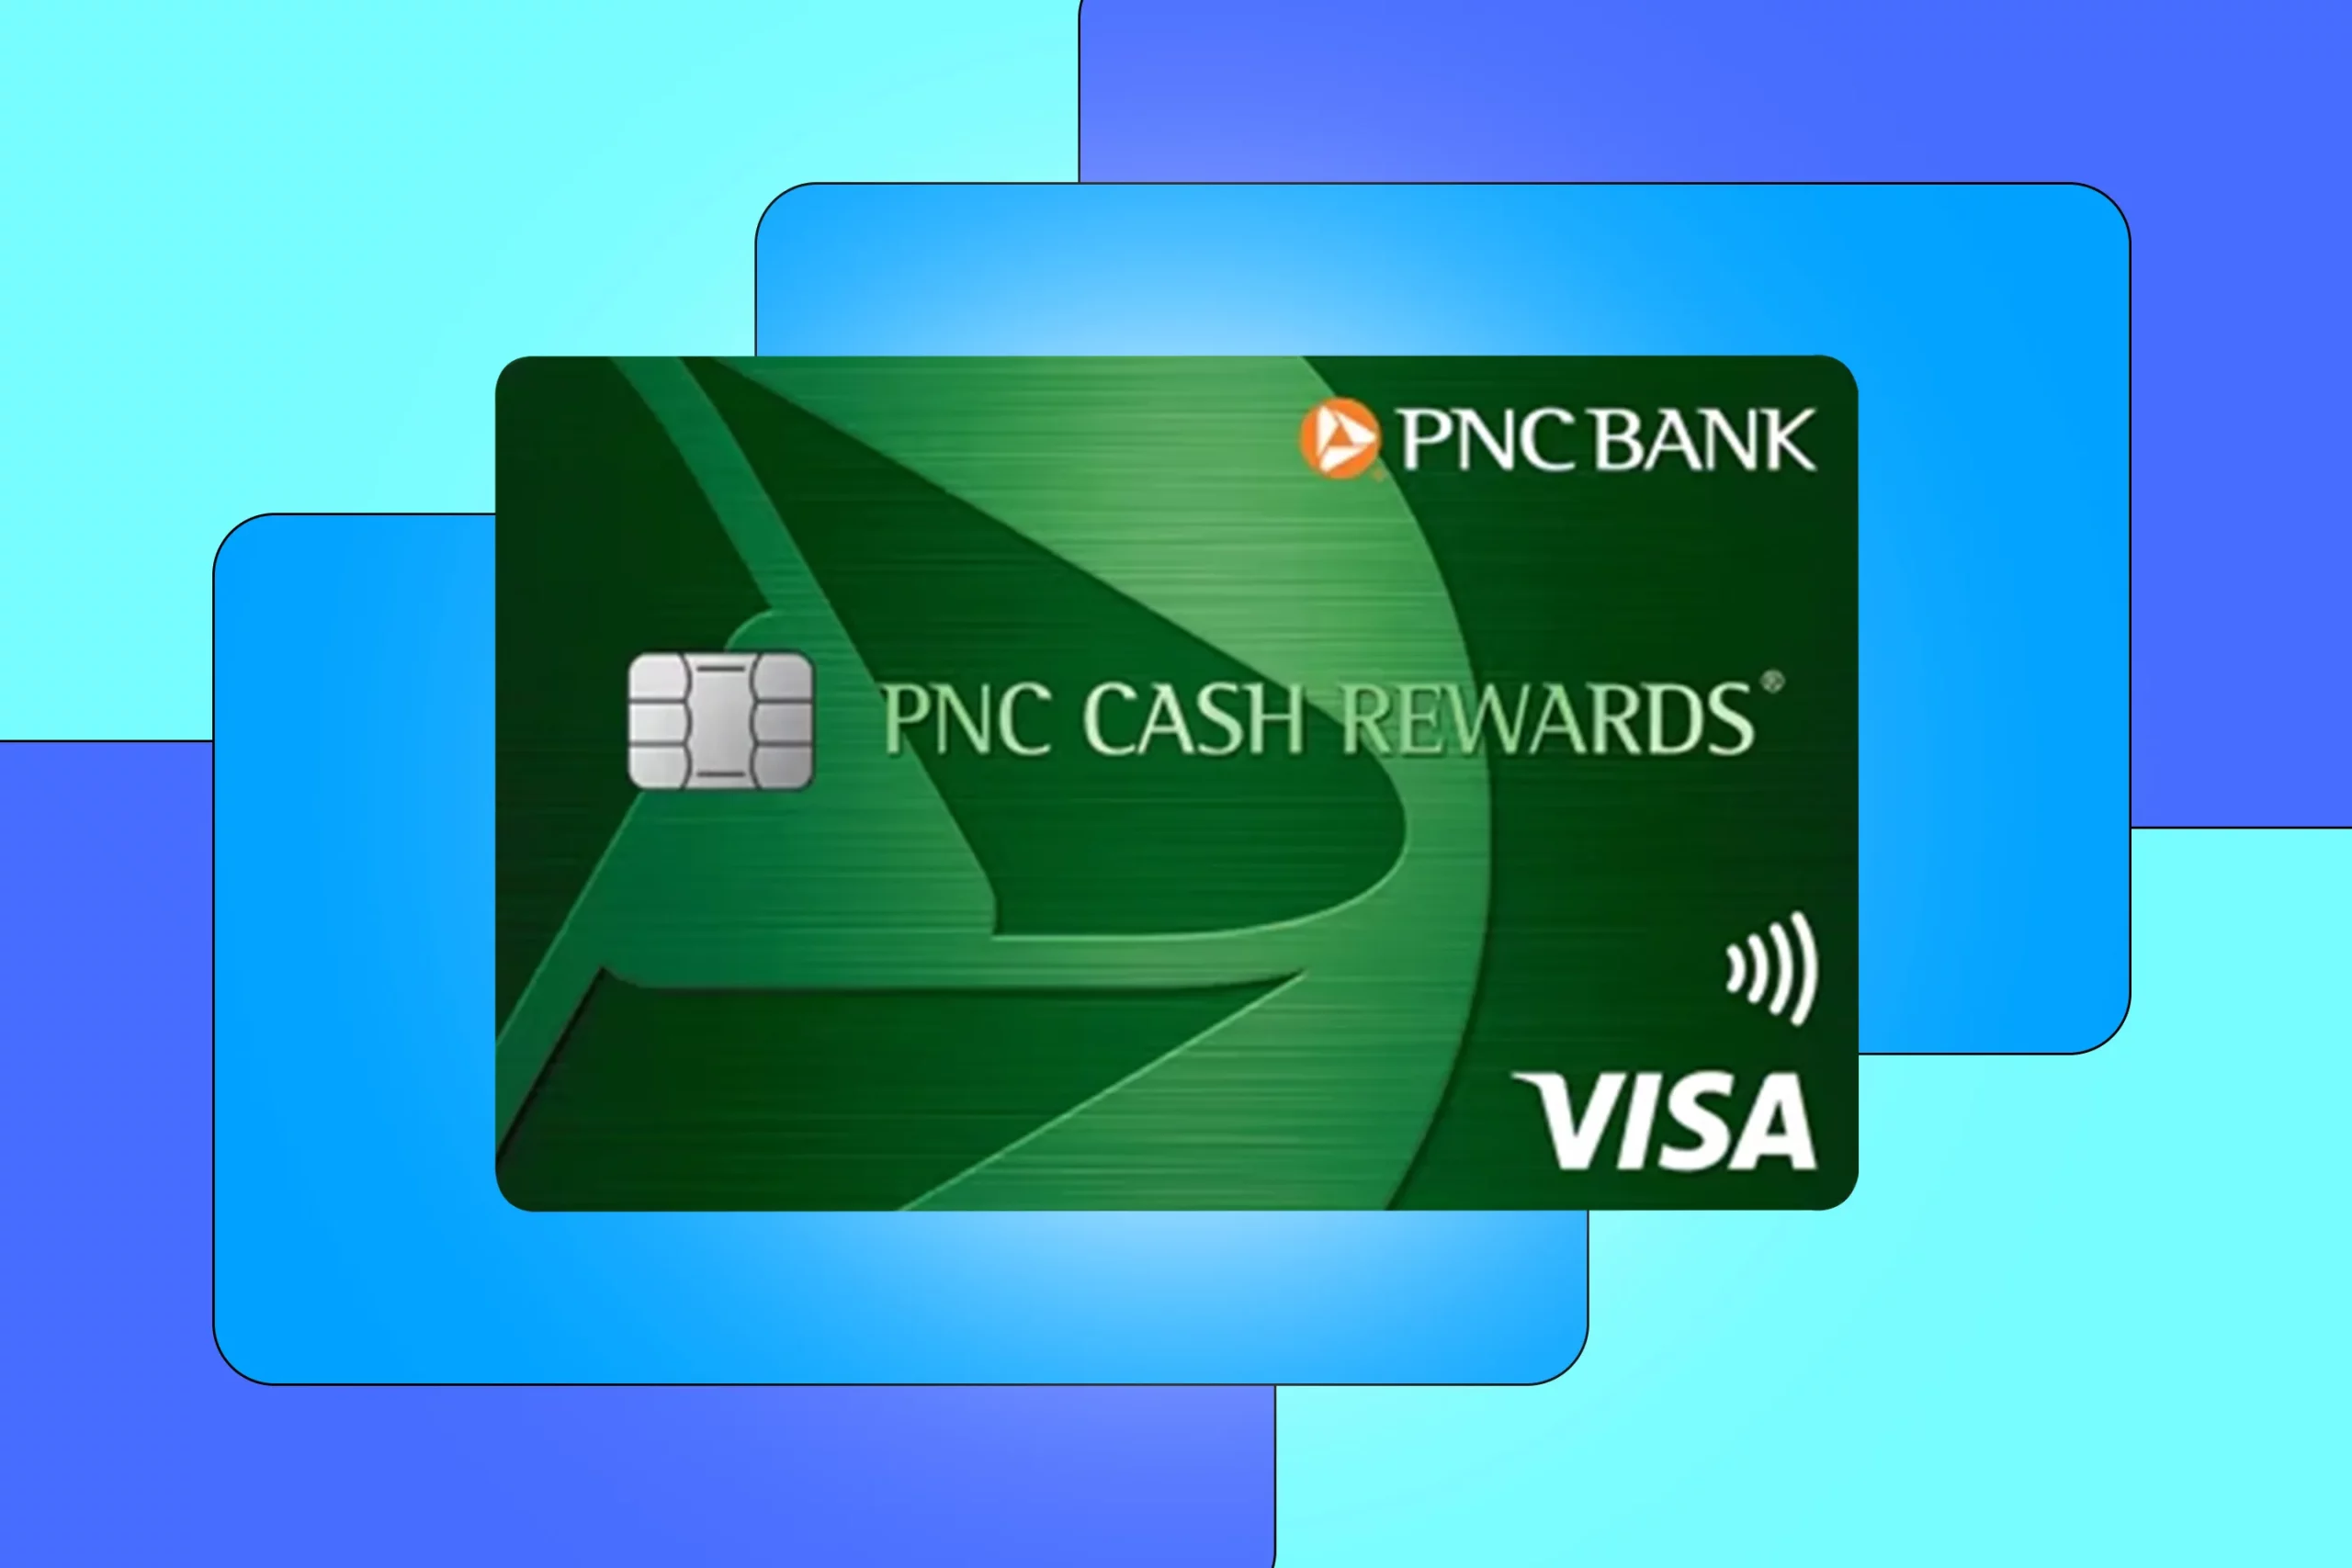 PNC - Enhance Your Purchasing Power with Our Credit Cards